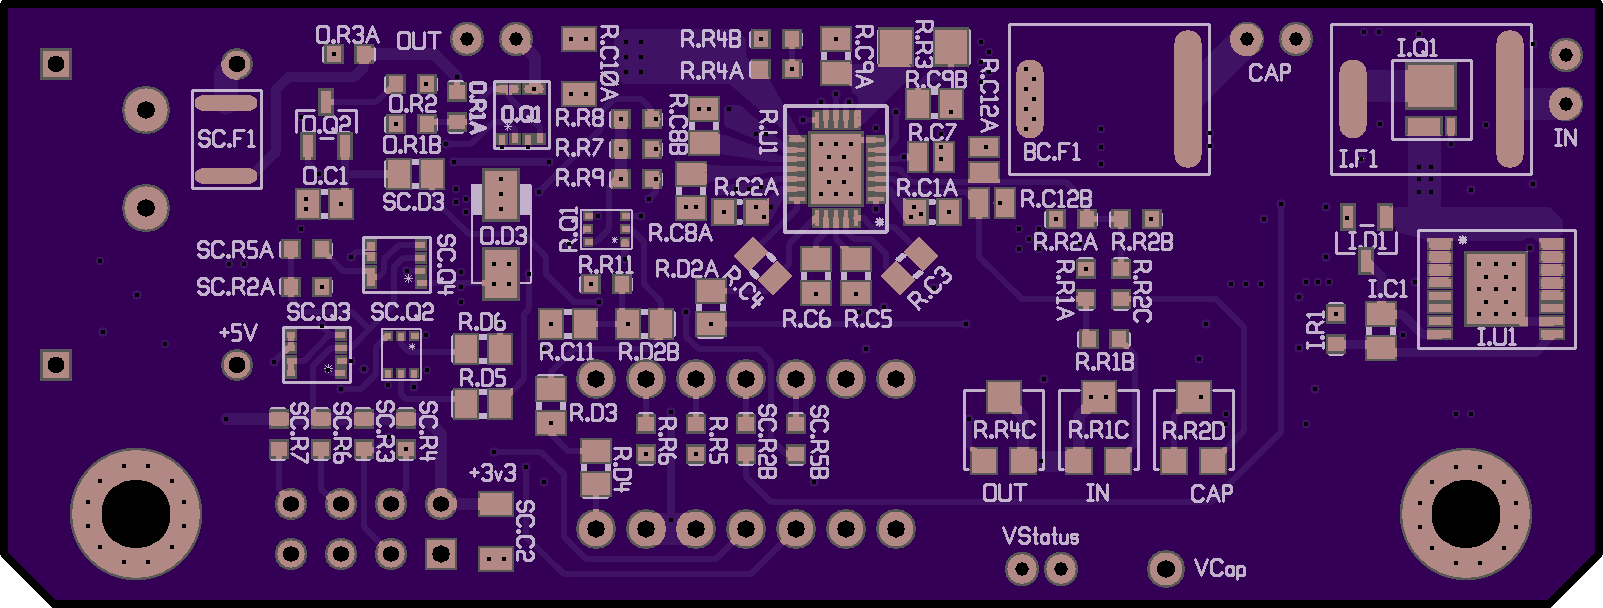 PCB Overview - Back